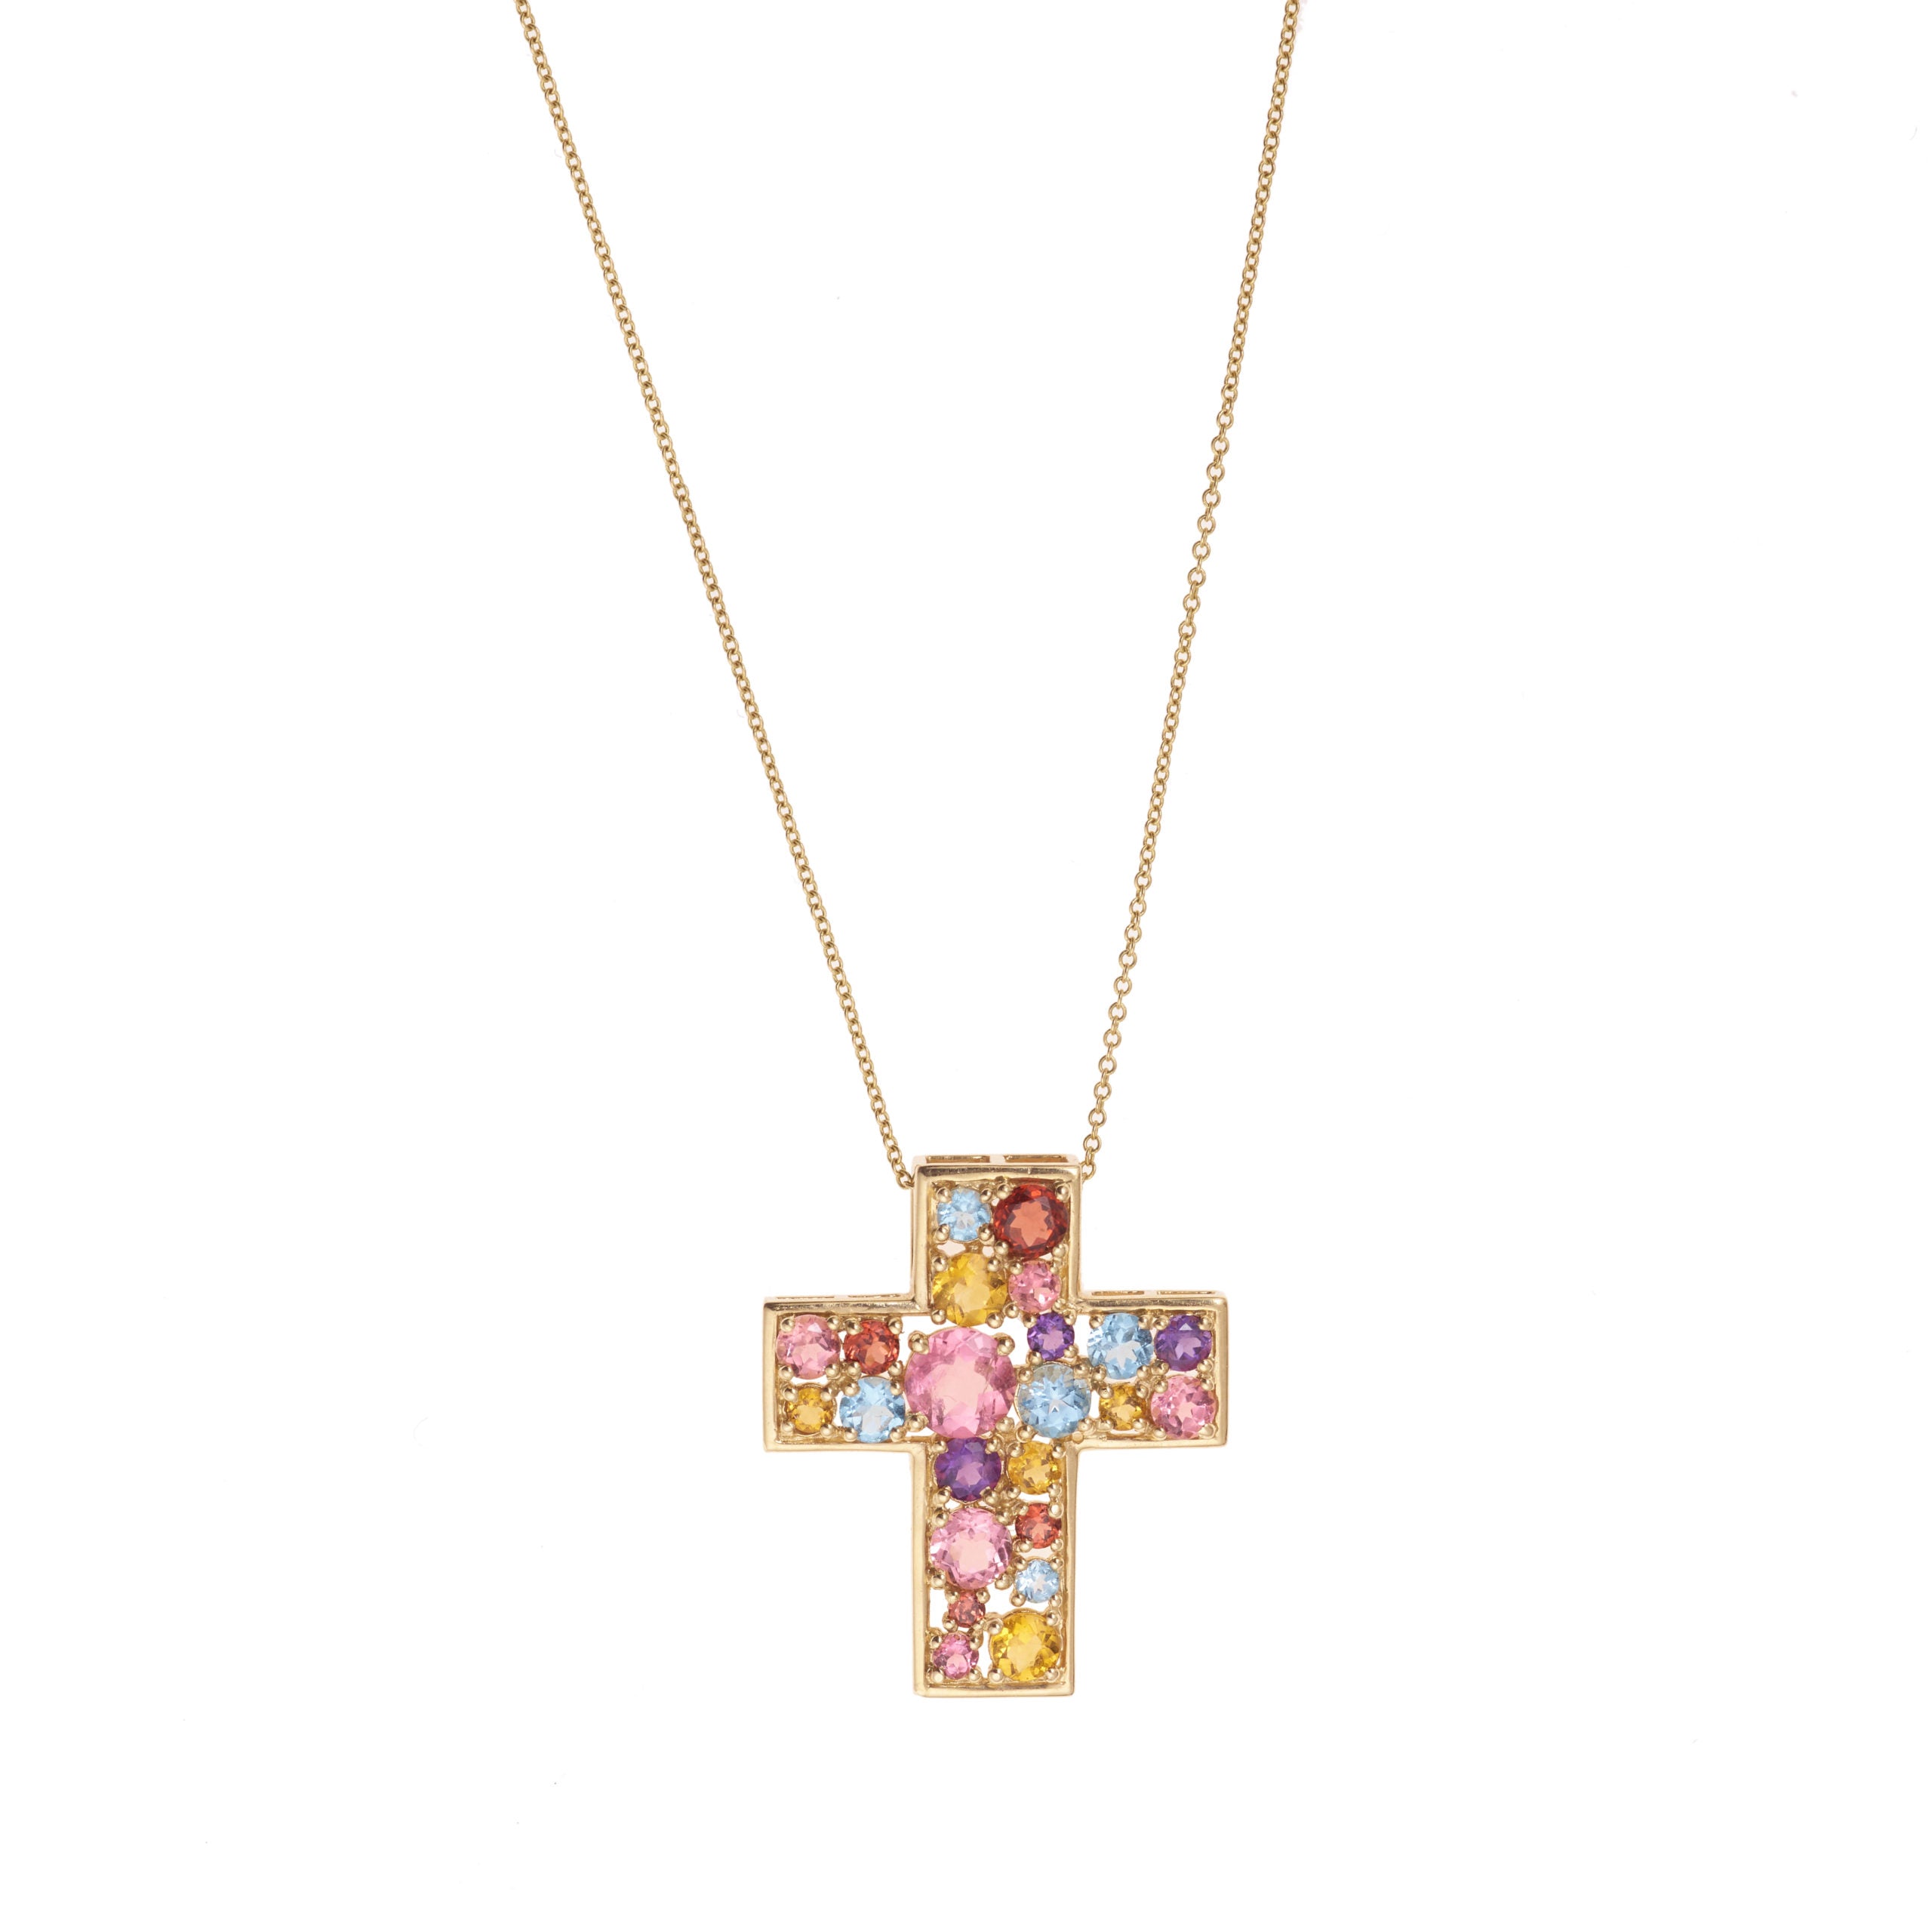 Colored Stones 14 Carats Yellow Gold Cross Pendant Necklace